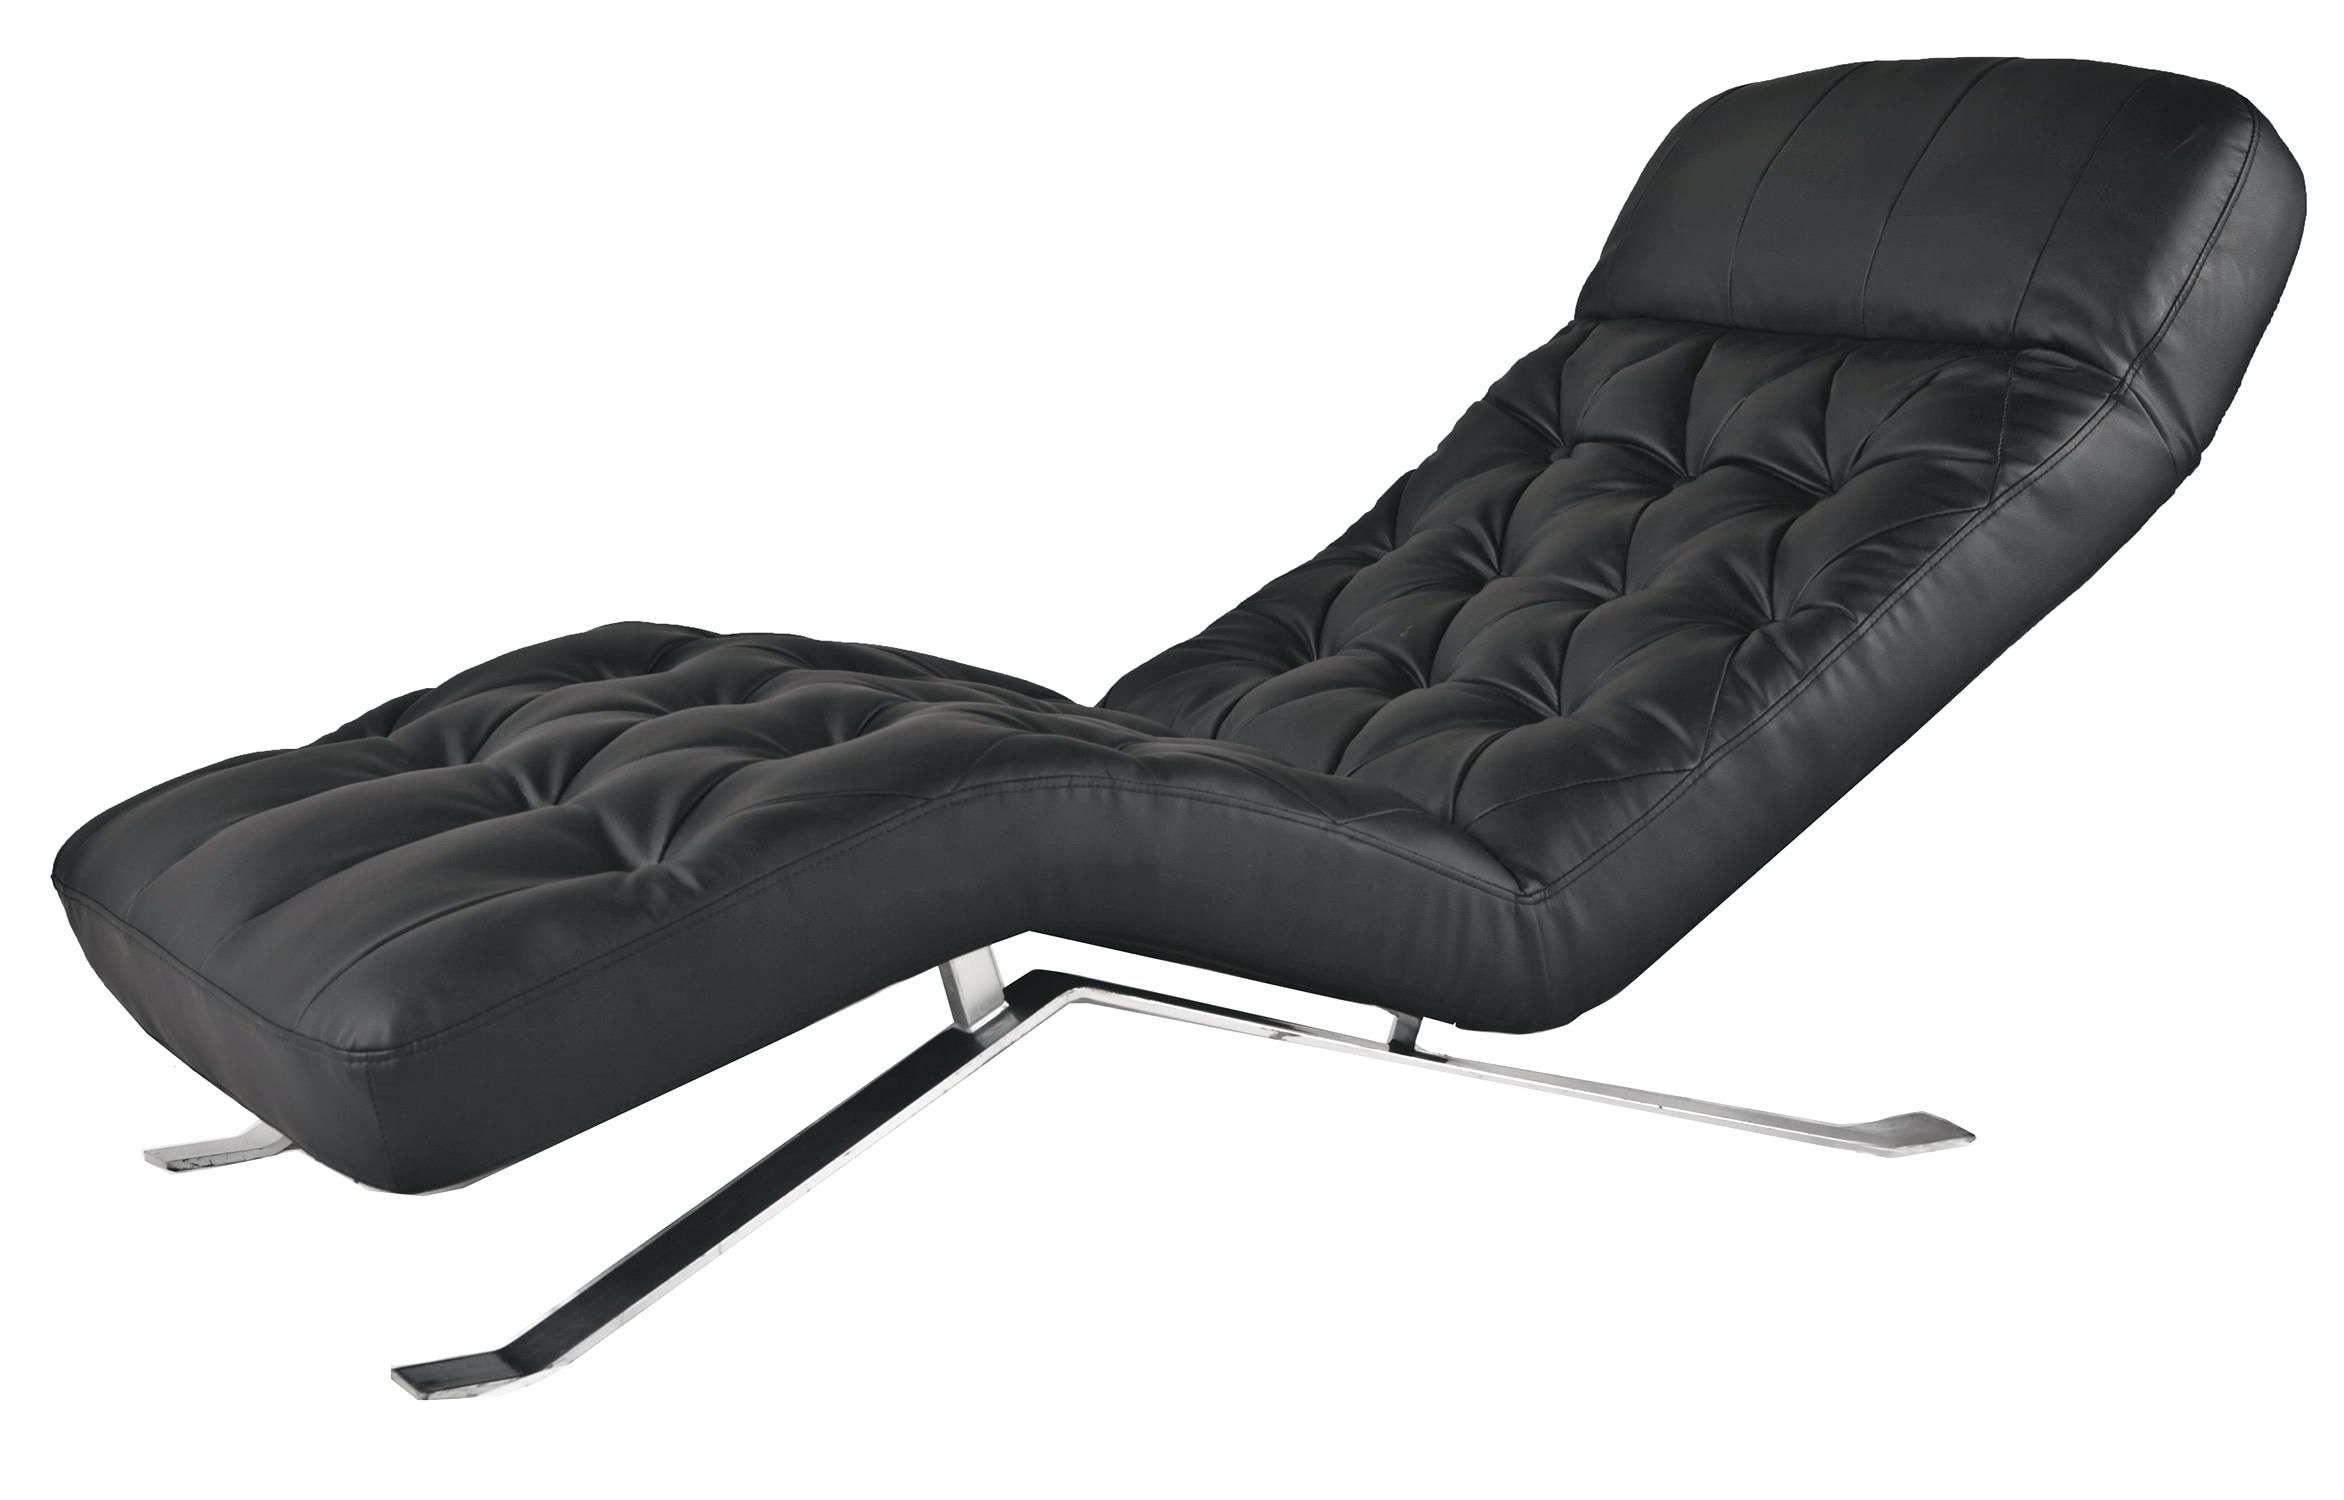 Decoration: Contemporary Chaise Lounge Chair For Current Contemporary Chaise Lounge Chairs (View 5 of 15)